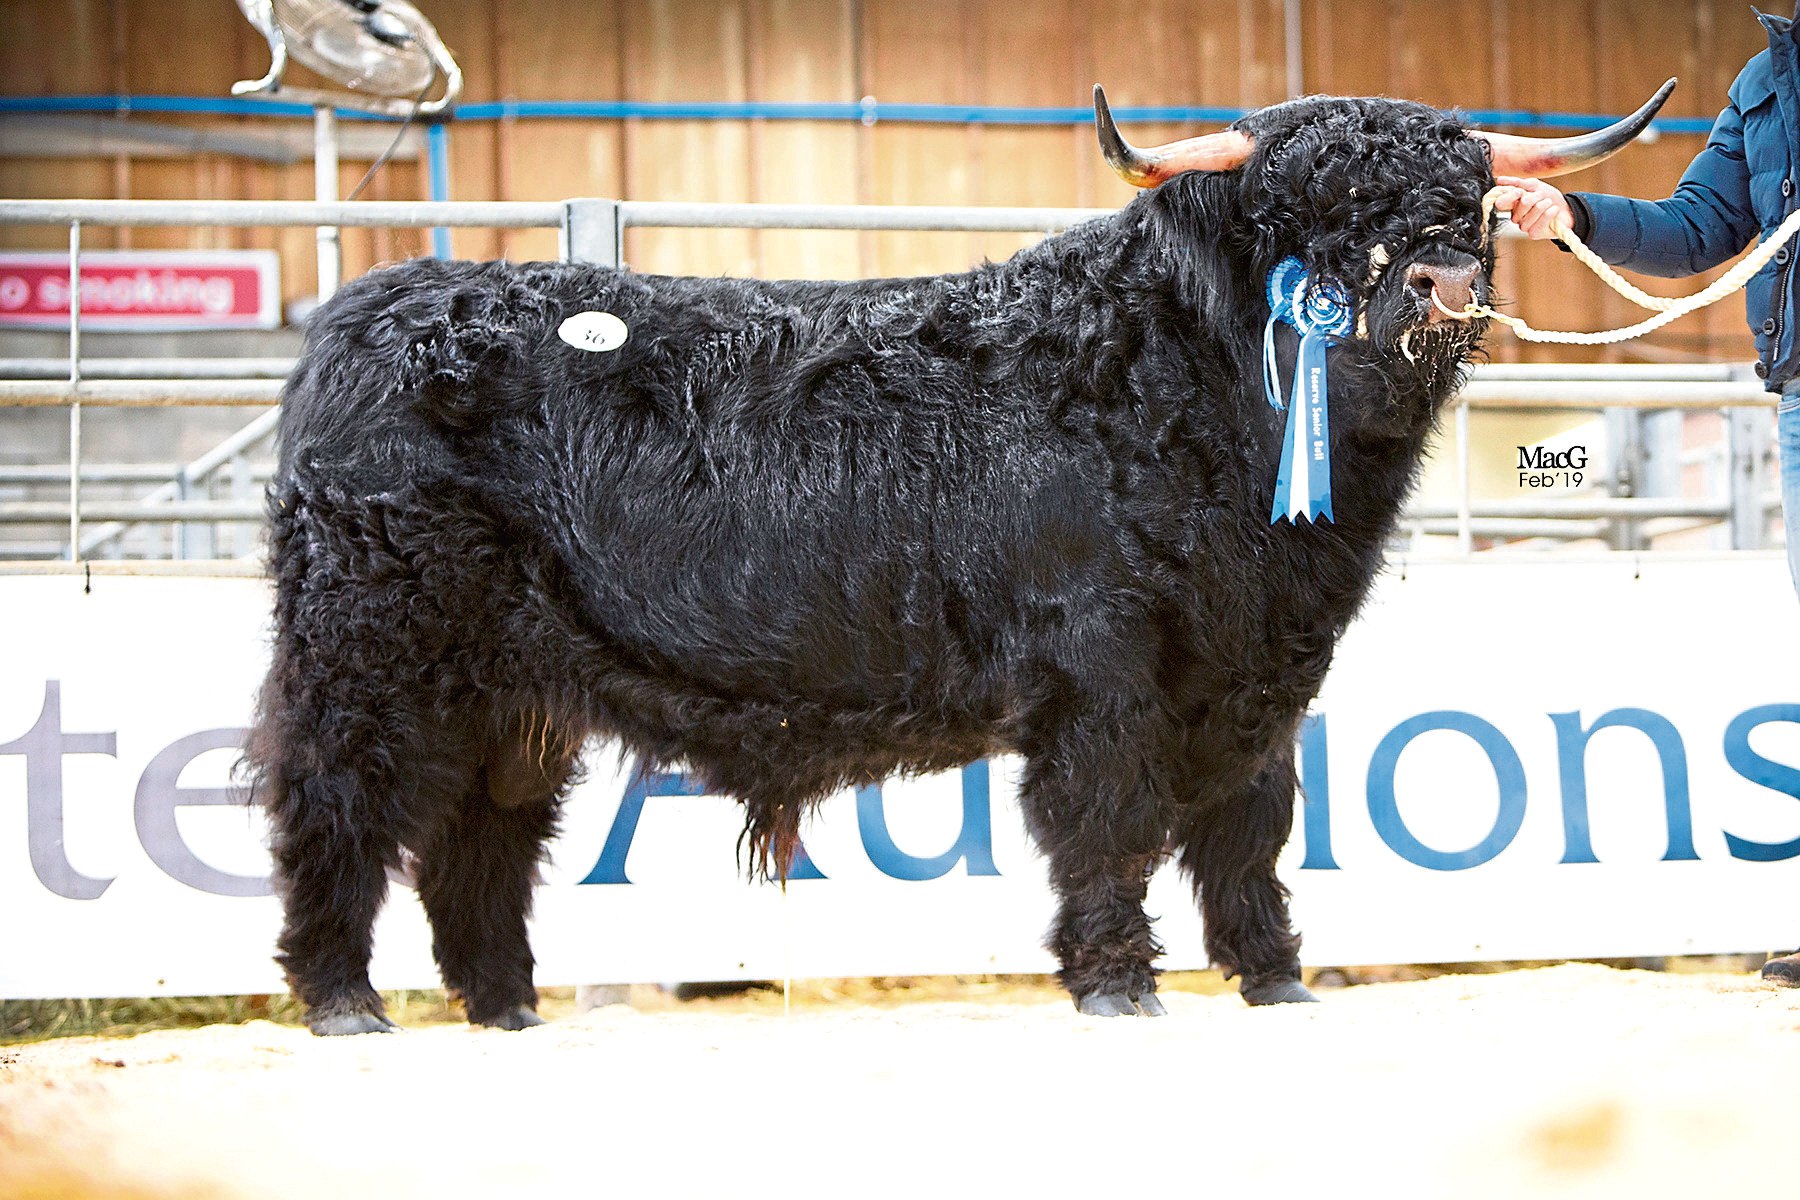 Muran Erchie of Ardbhan sold for 11,000gn at the Highland Cattle Sale in Oban in February 2019. Pic by Catherine MacGregor